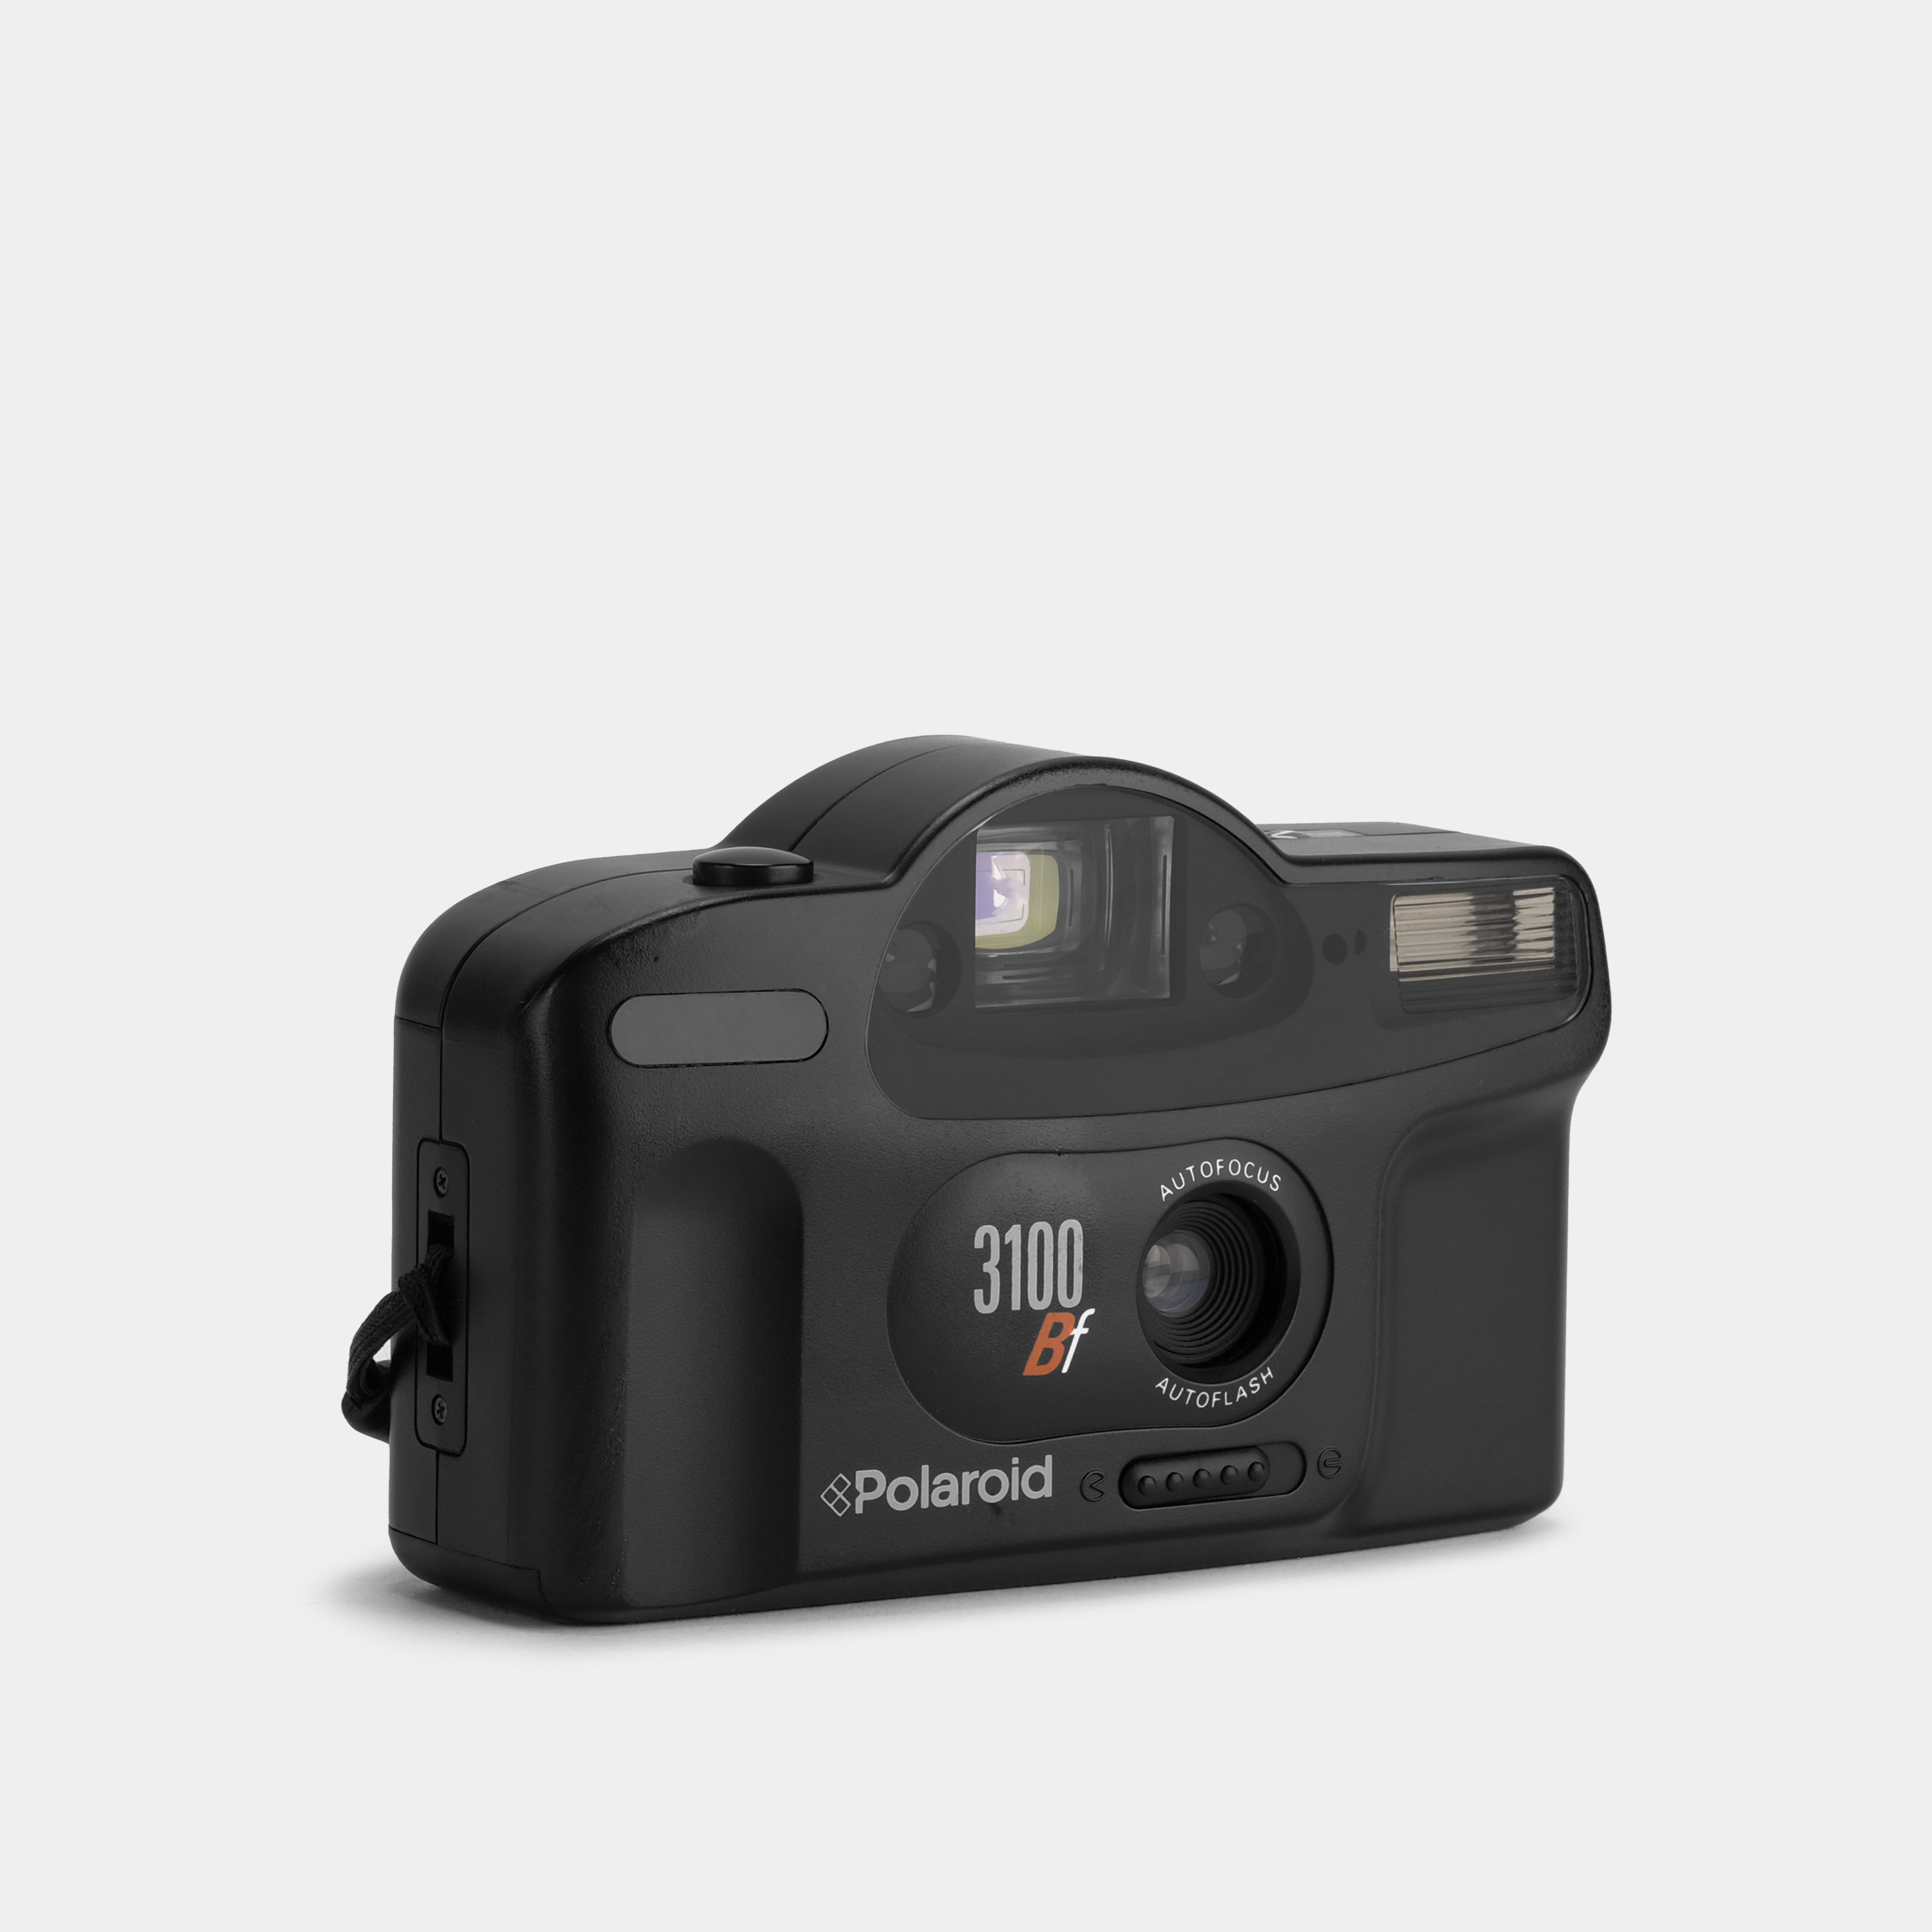 Polaroid 3100 Bf Date Back 35mm Point and Shoot Film Camera